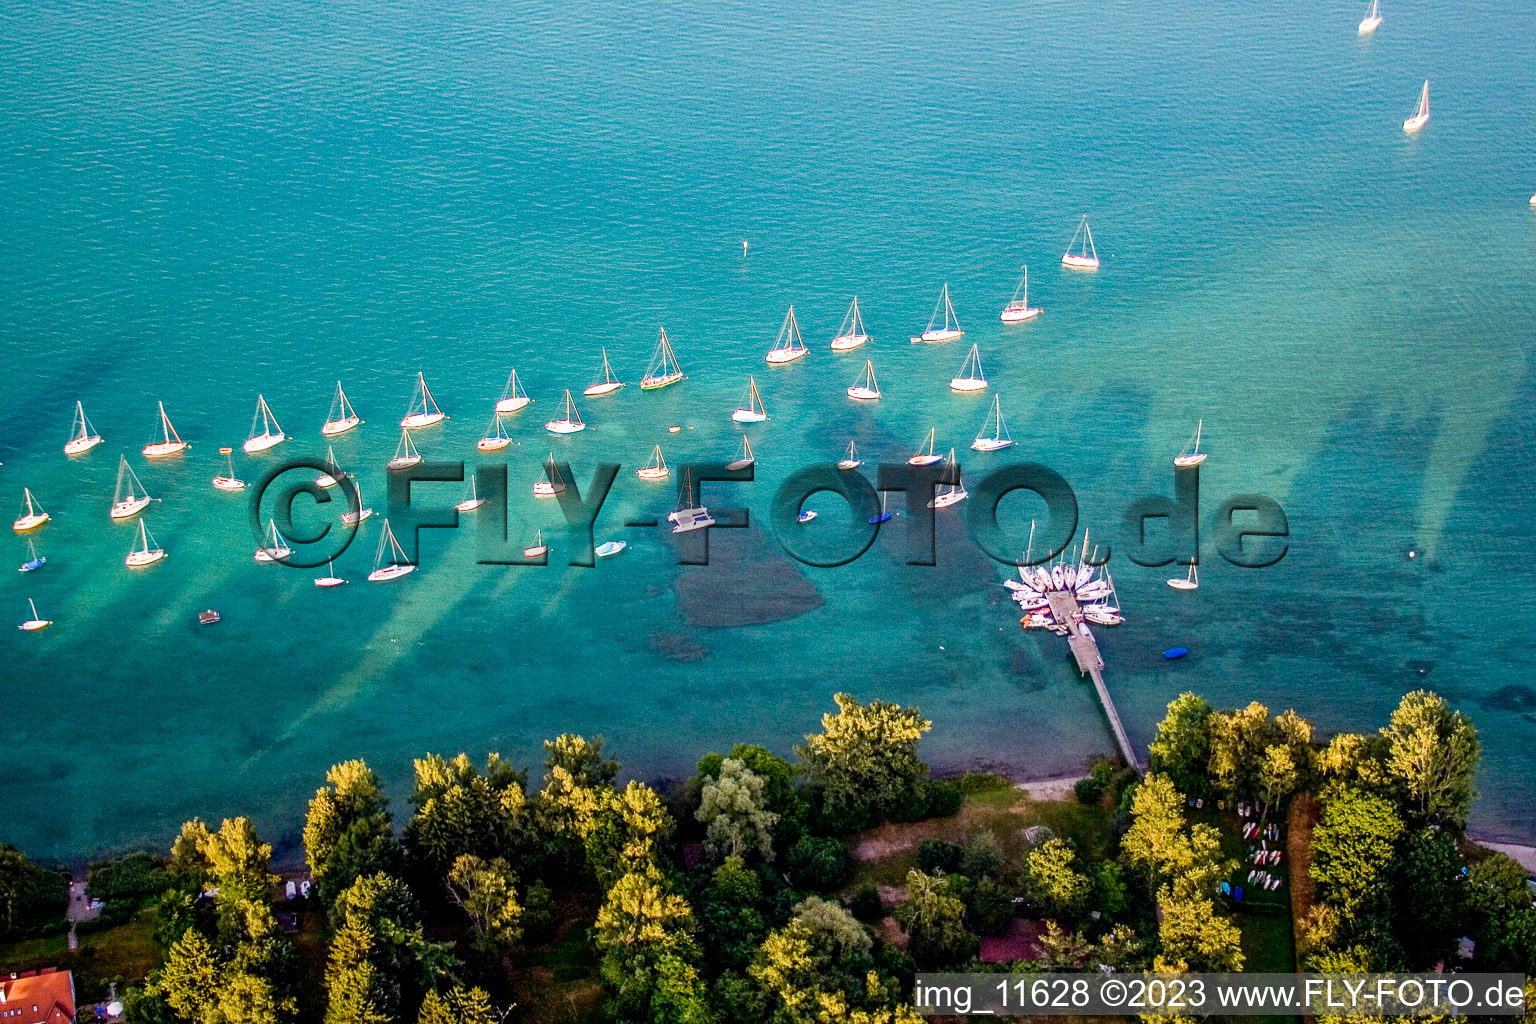 Pleasure boat marina with docks and moorings on the shore area of Lake of Constance in the district Litzelstetten in Konstanz in the state Baden-Wurttemberg, Germany